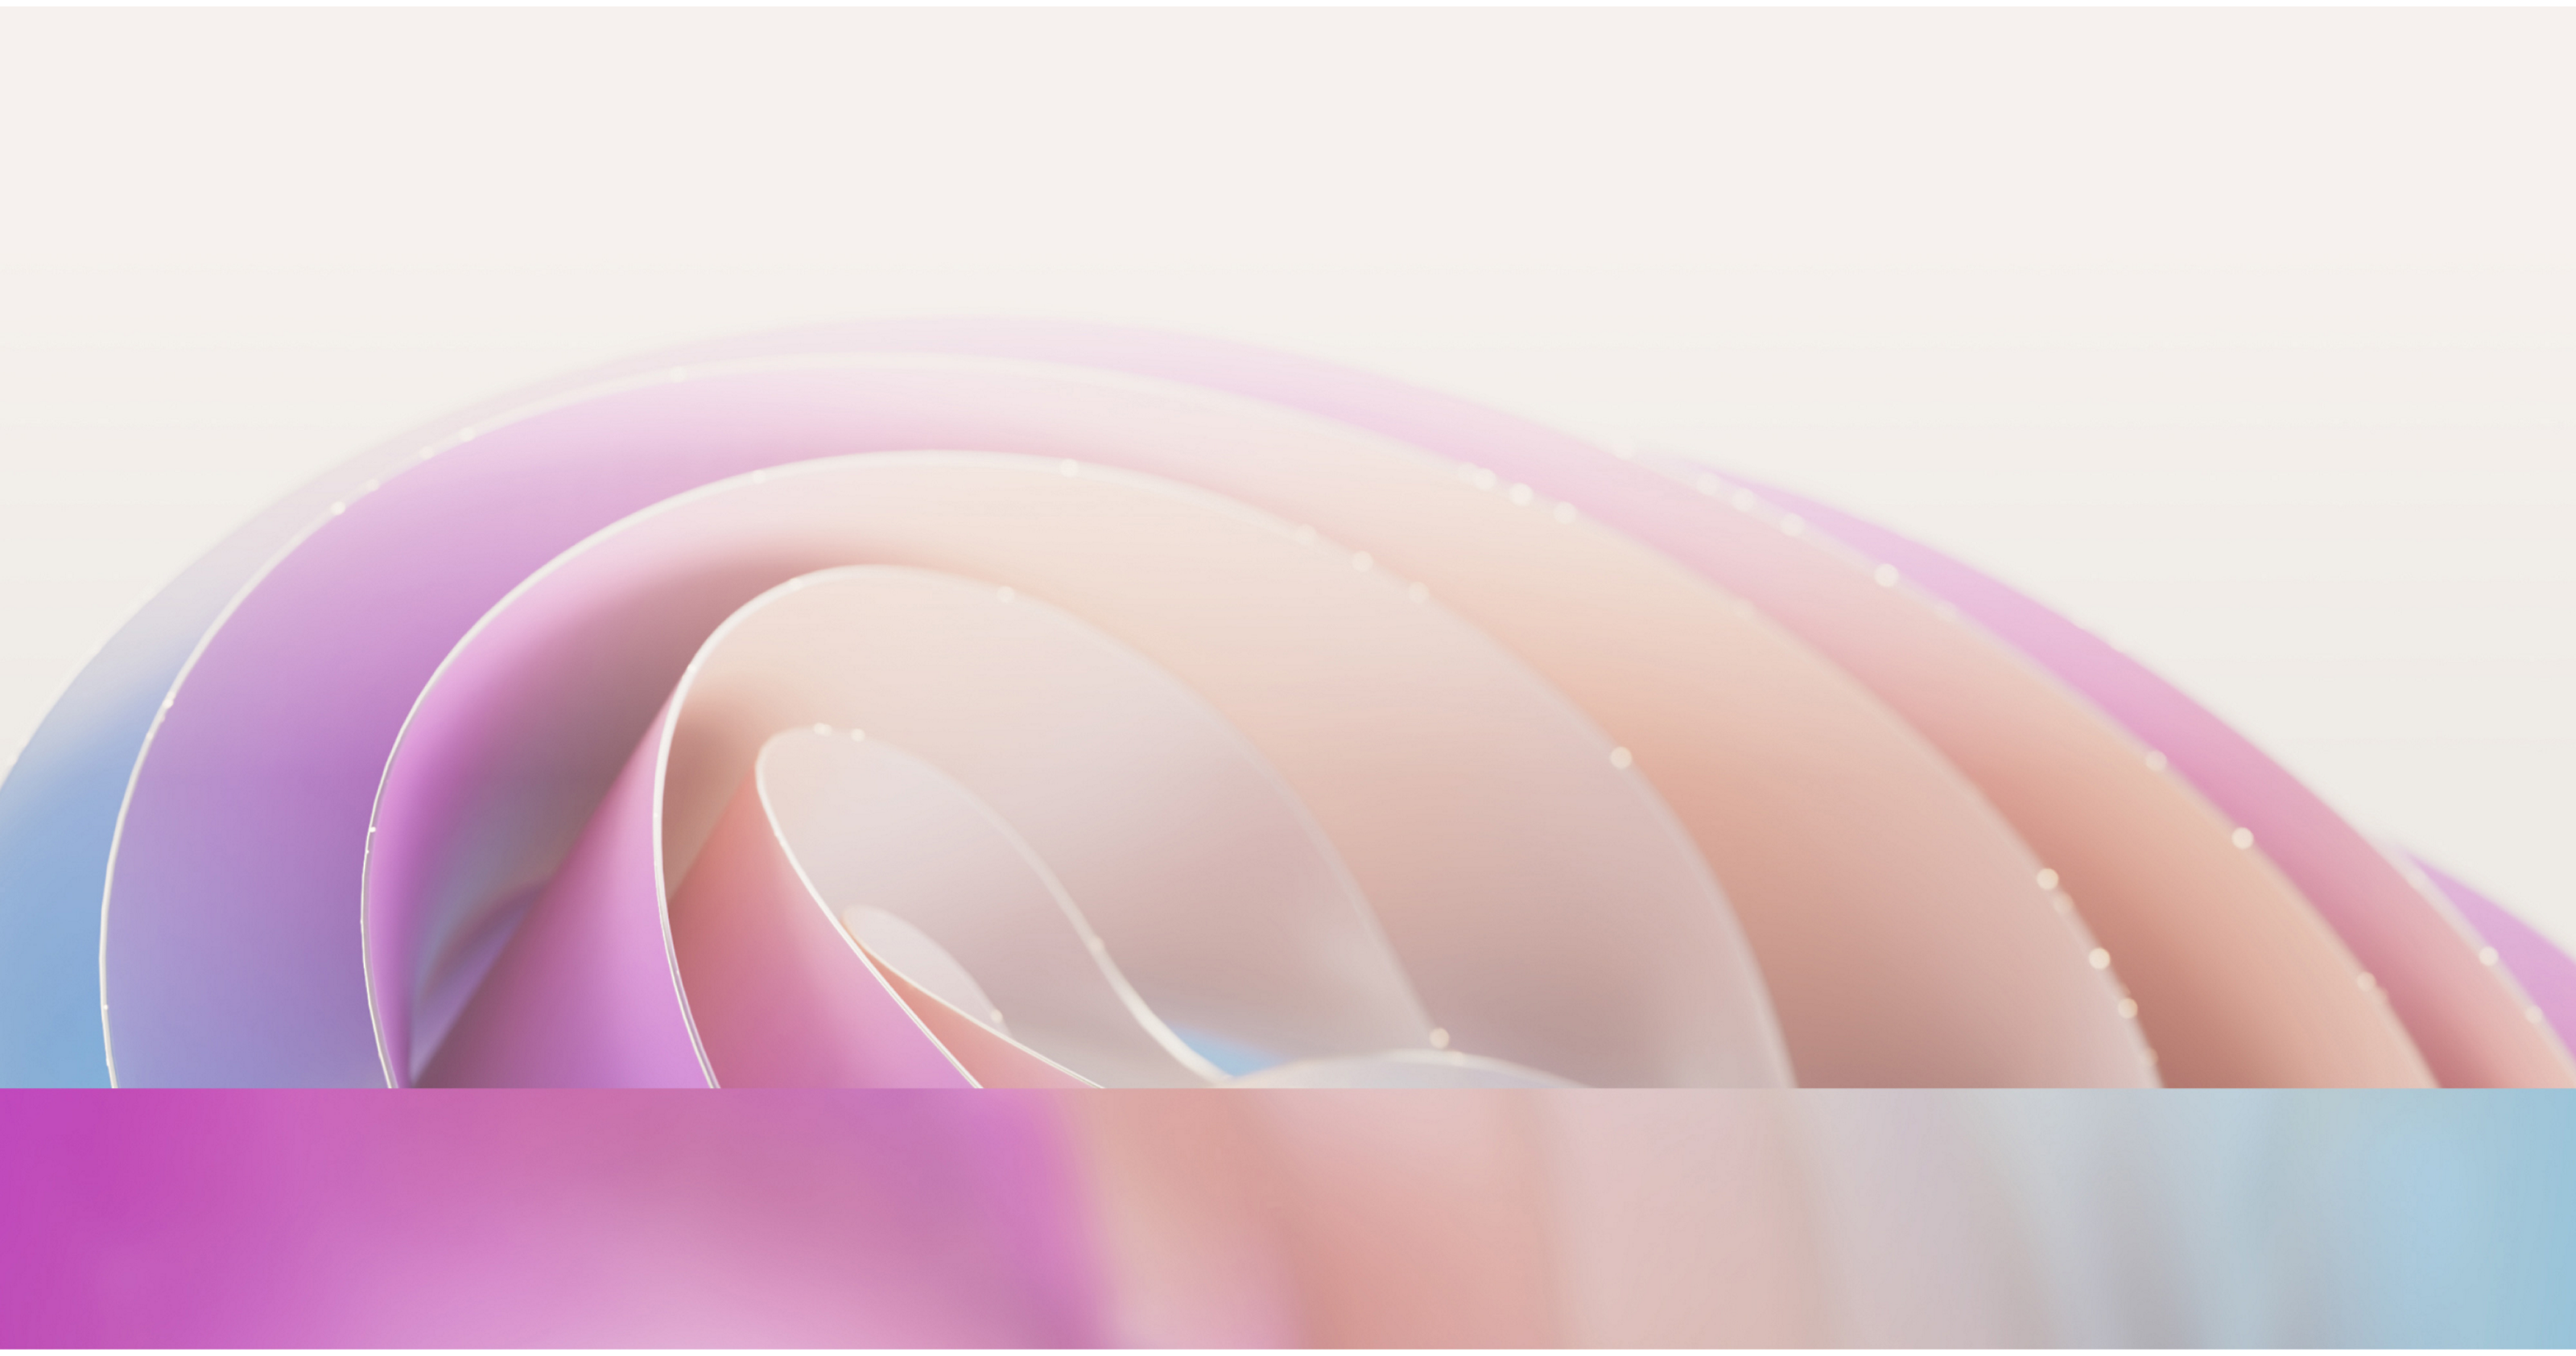 Abstract background with soft wave-like layers in pastel pink, purple, and blue hues with a glowing, soft focus effect.